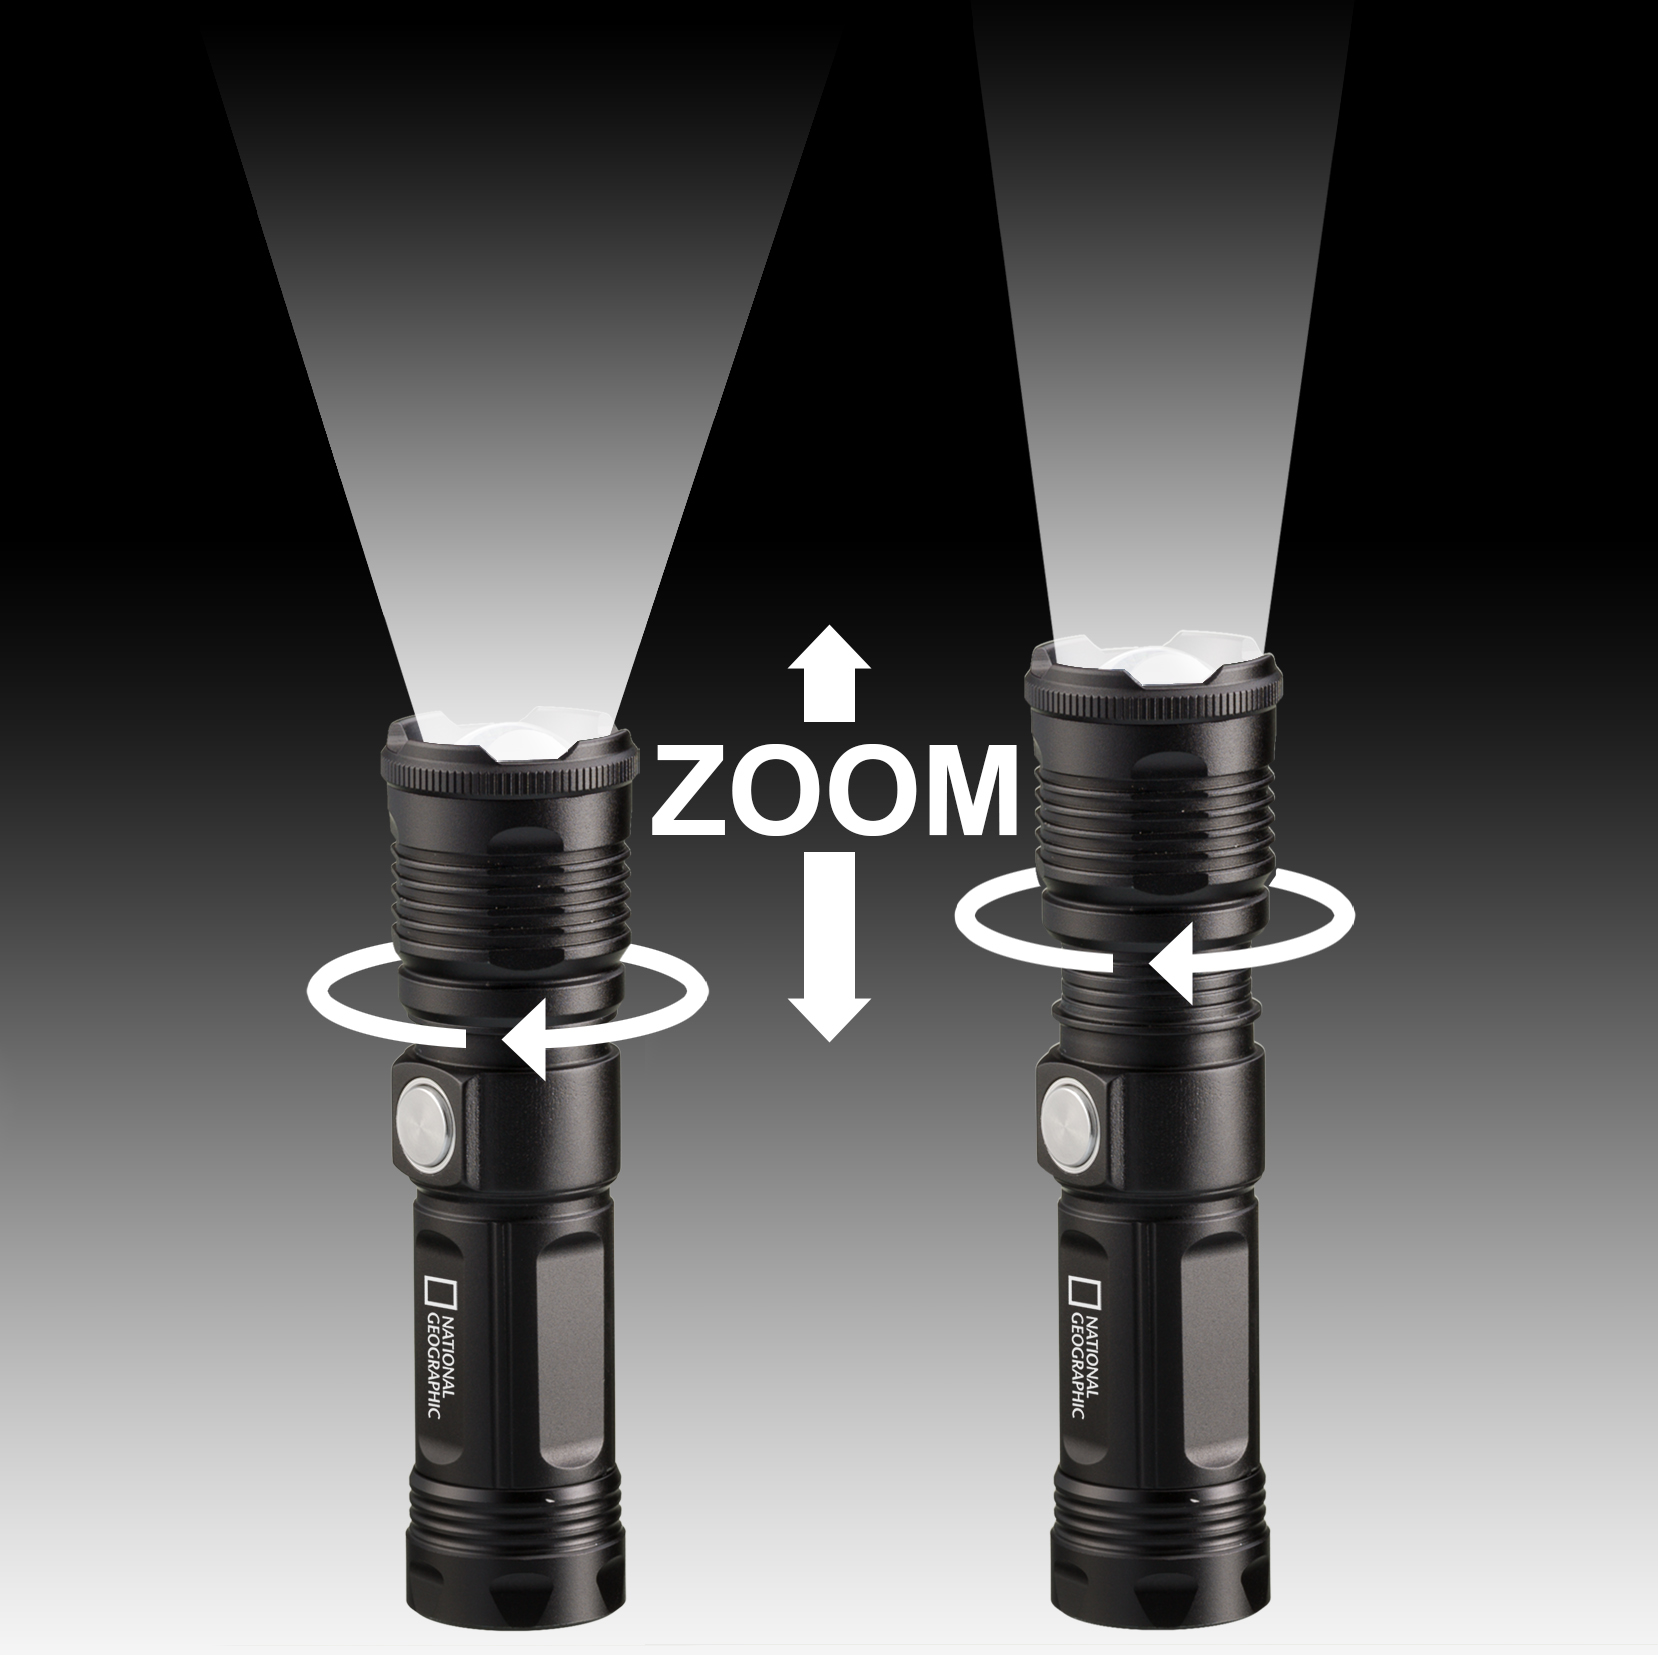 Lampe torche zoom LED 1000 lm NATIONAL GEOGRAPHIC ILUMINOS 1000